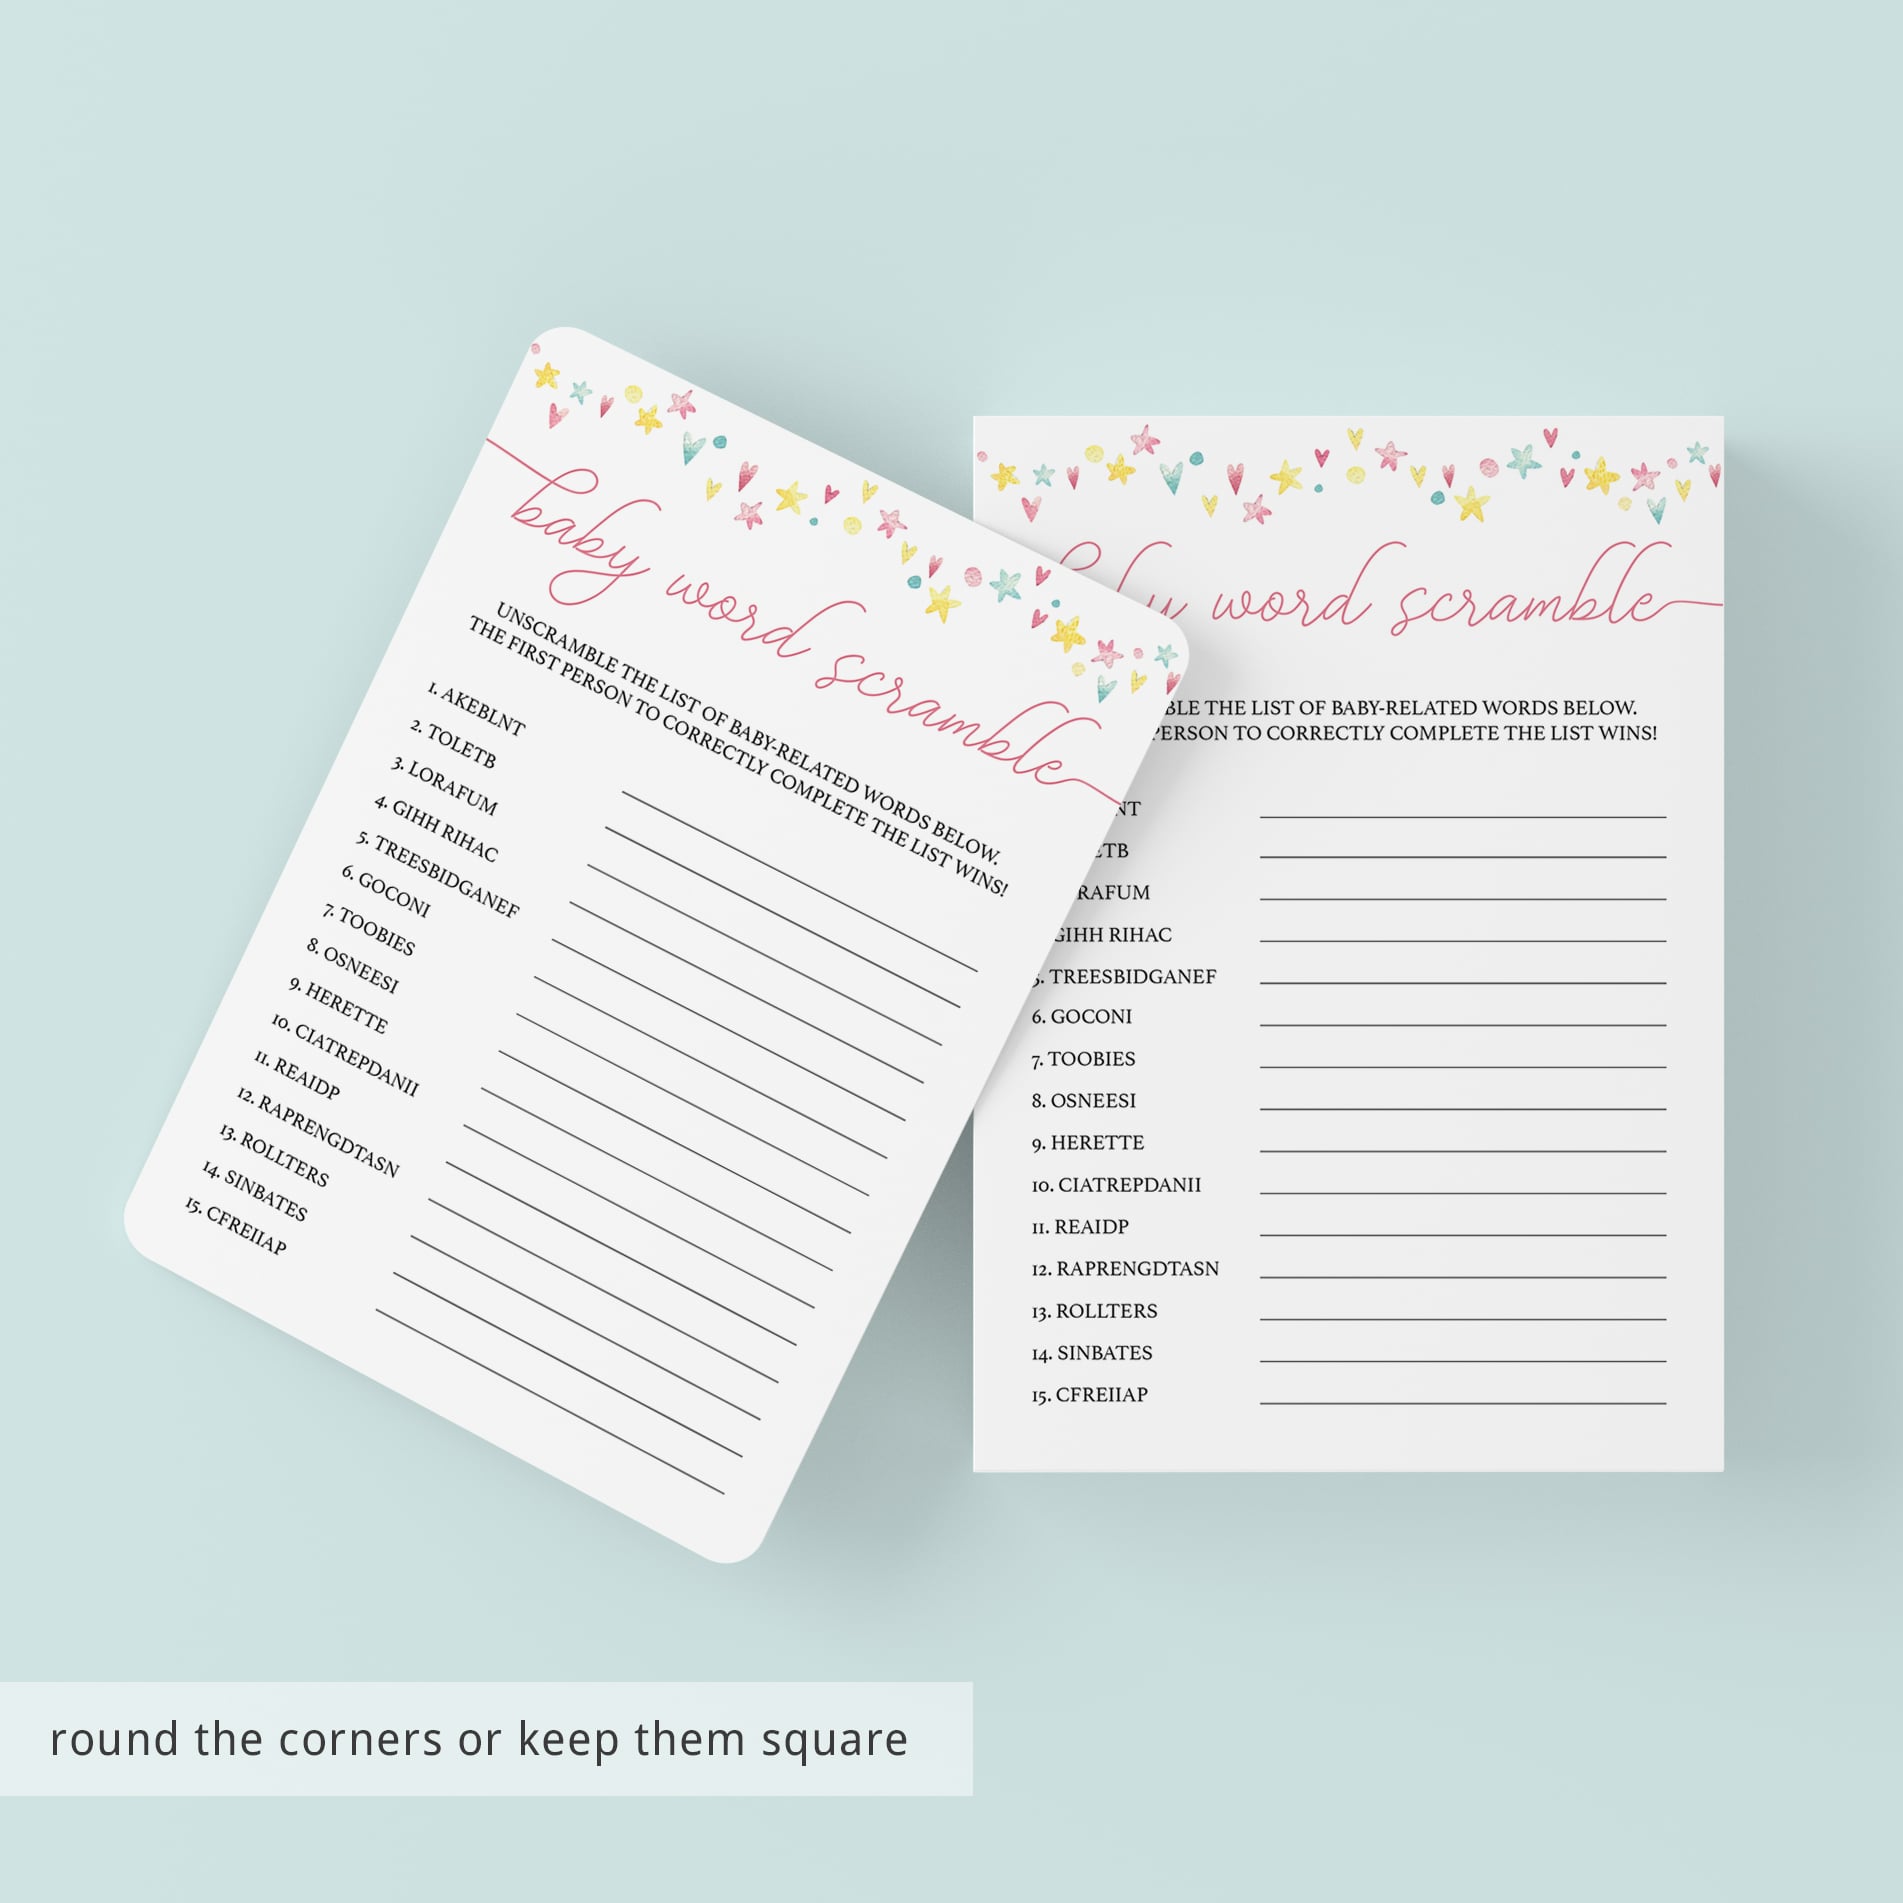 Games and answer keys for baby girl shower download PDF by LittleSizzle